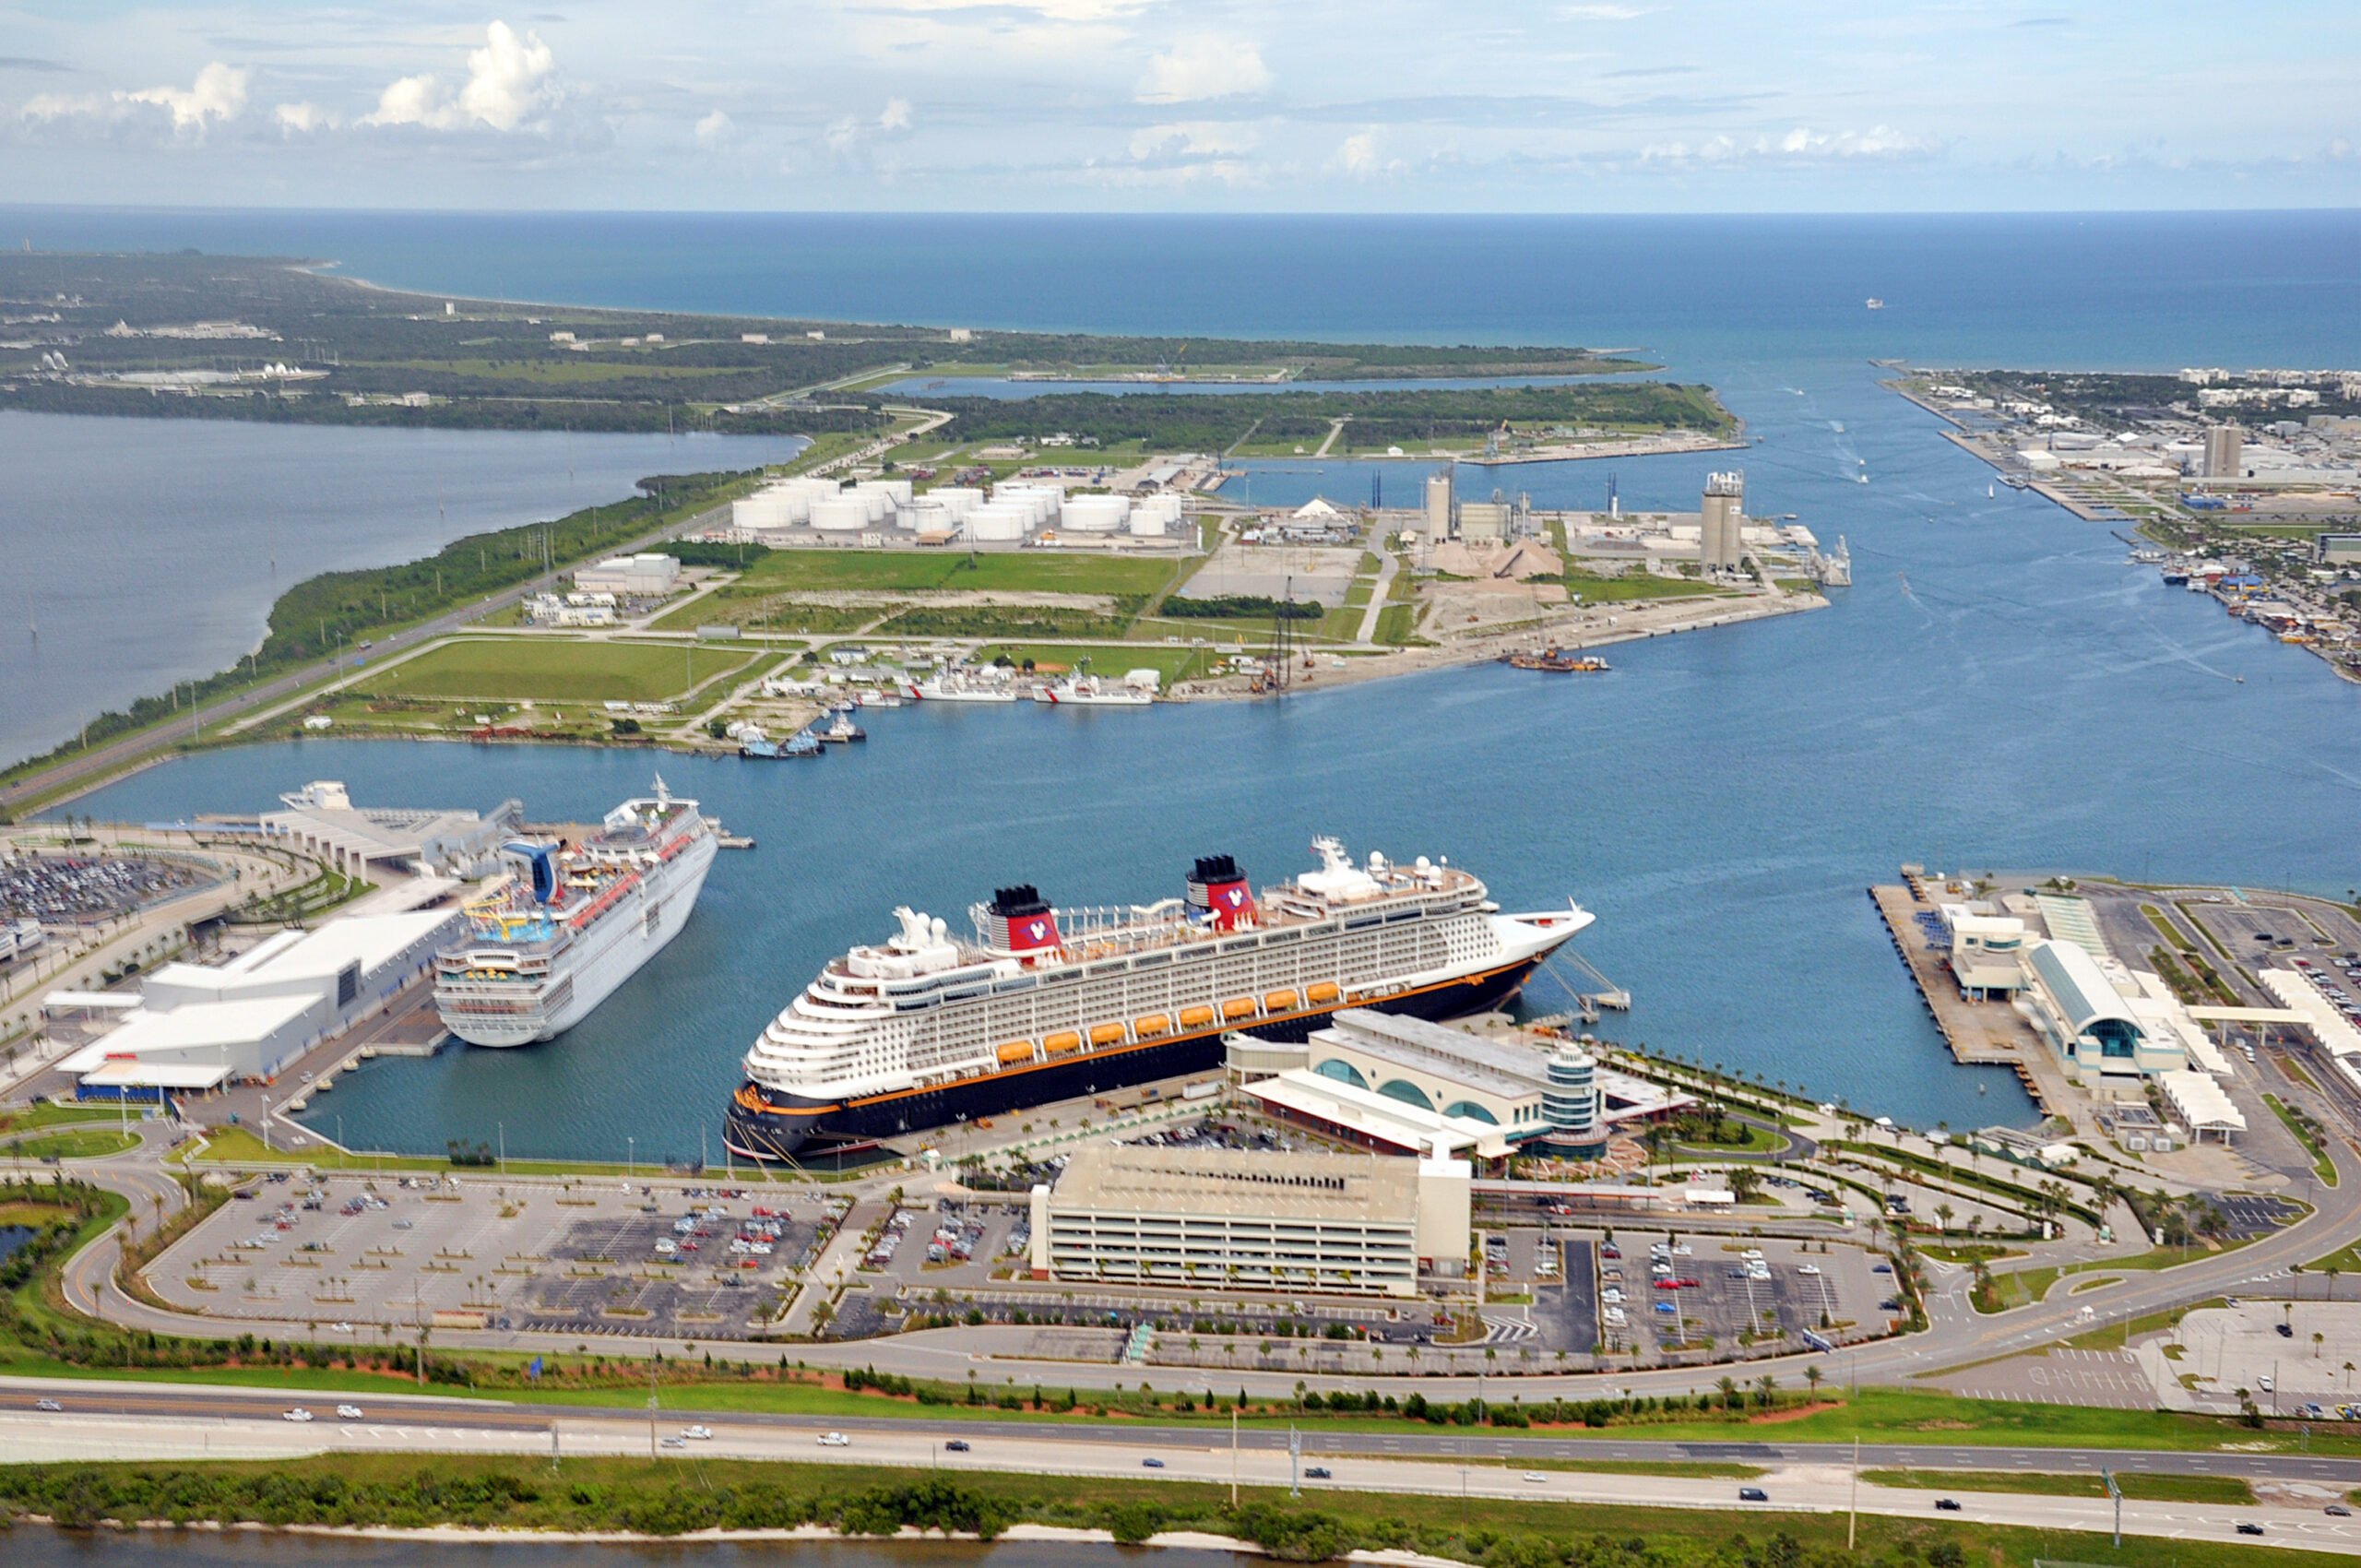 Aerial shot of the west side of Port Canaveral with ships docked